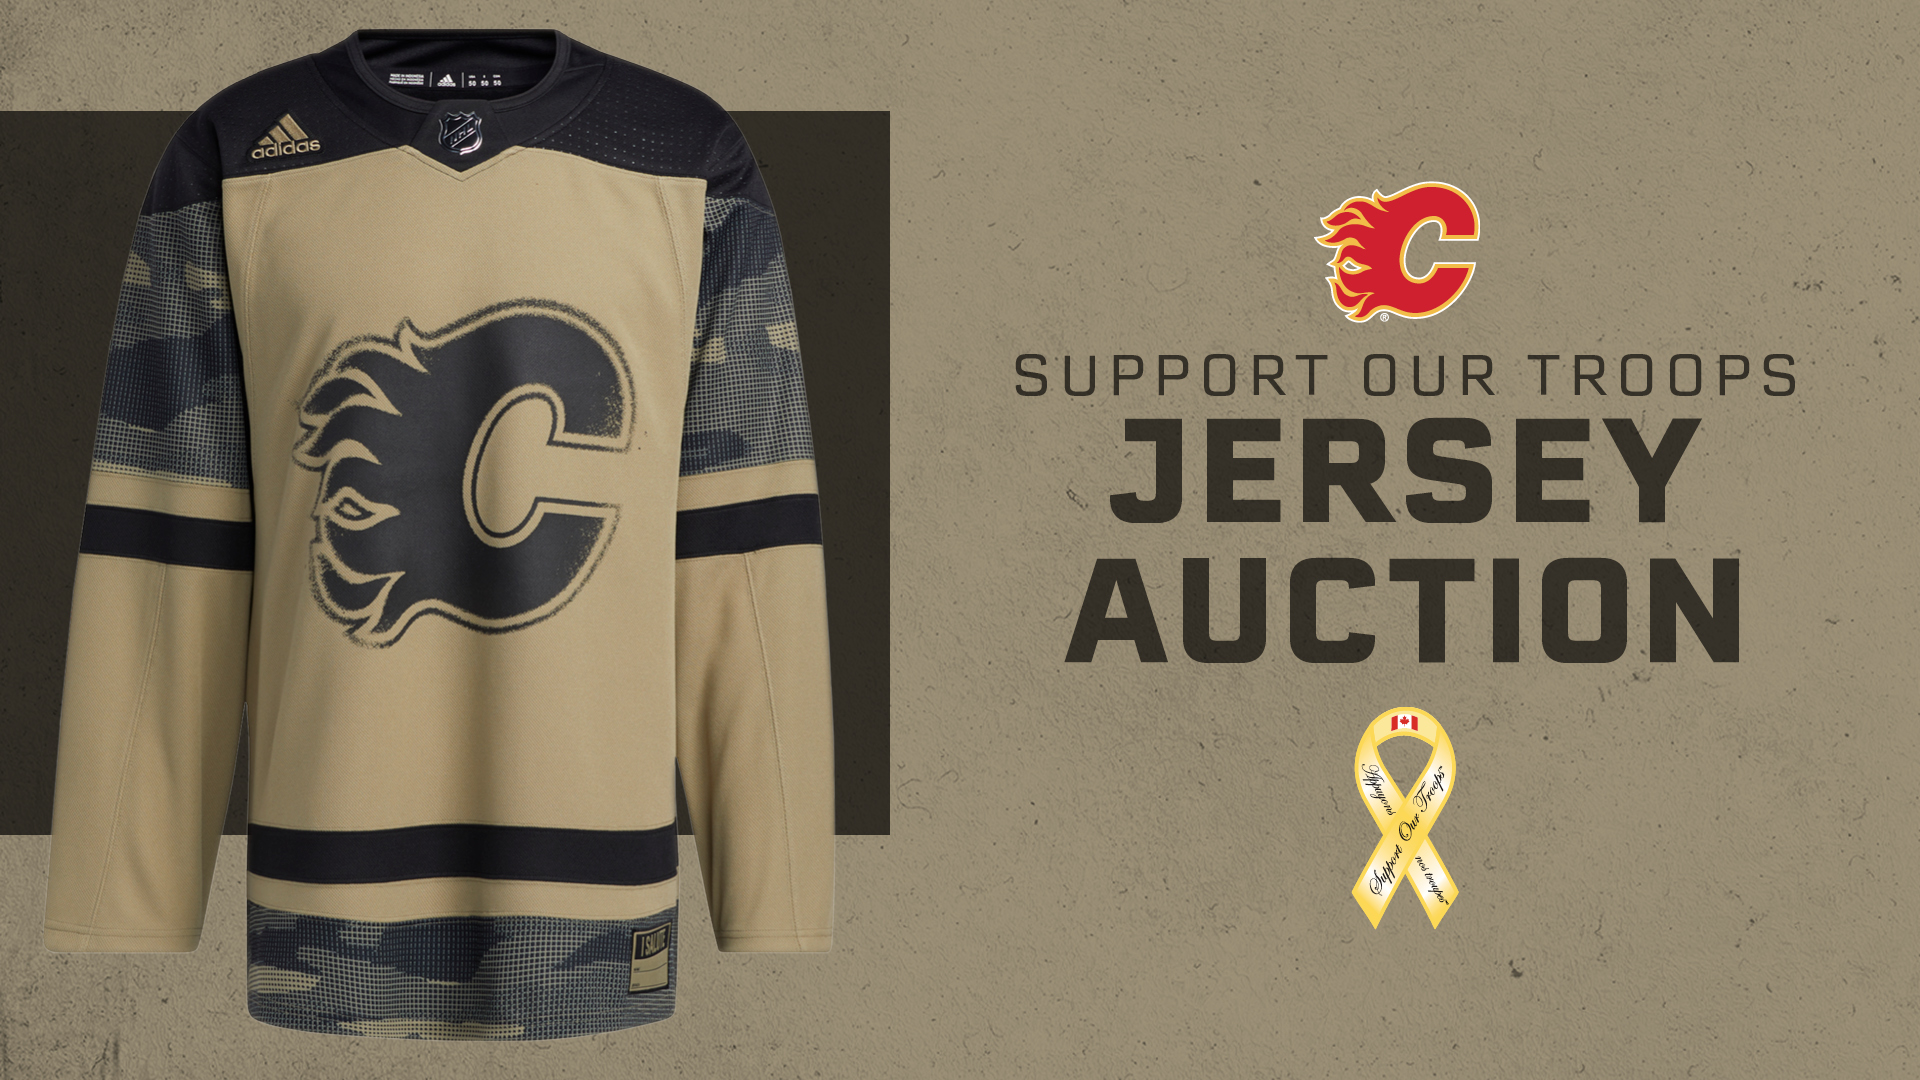 This is the only jersey sponsor that I will support : r/CalgaryFlames